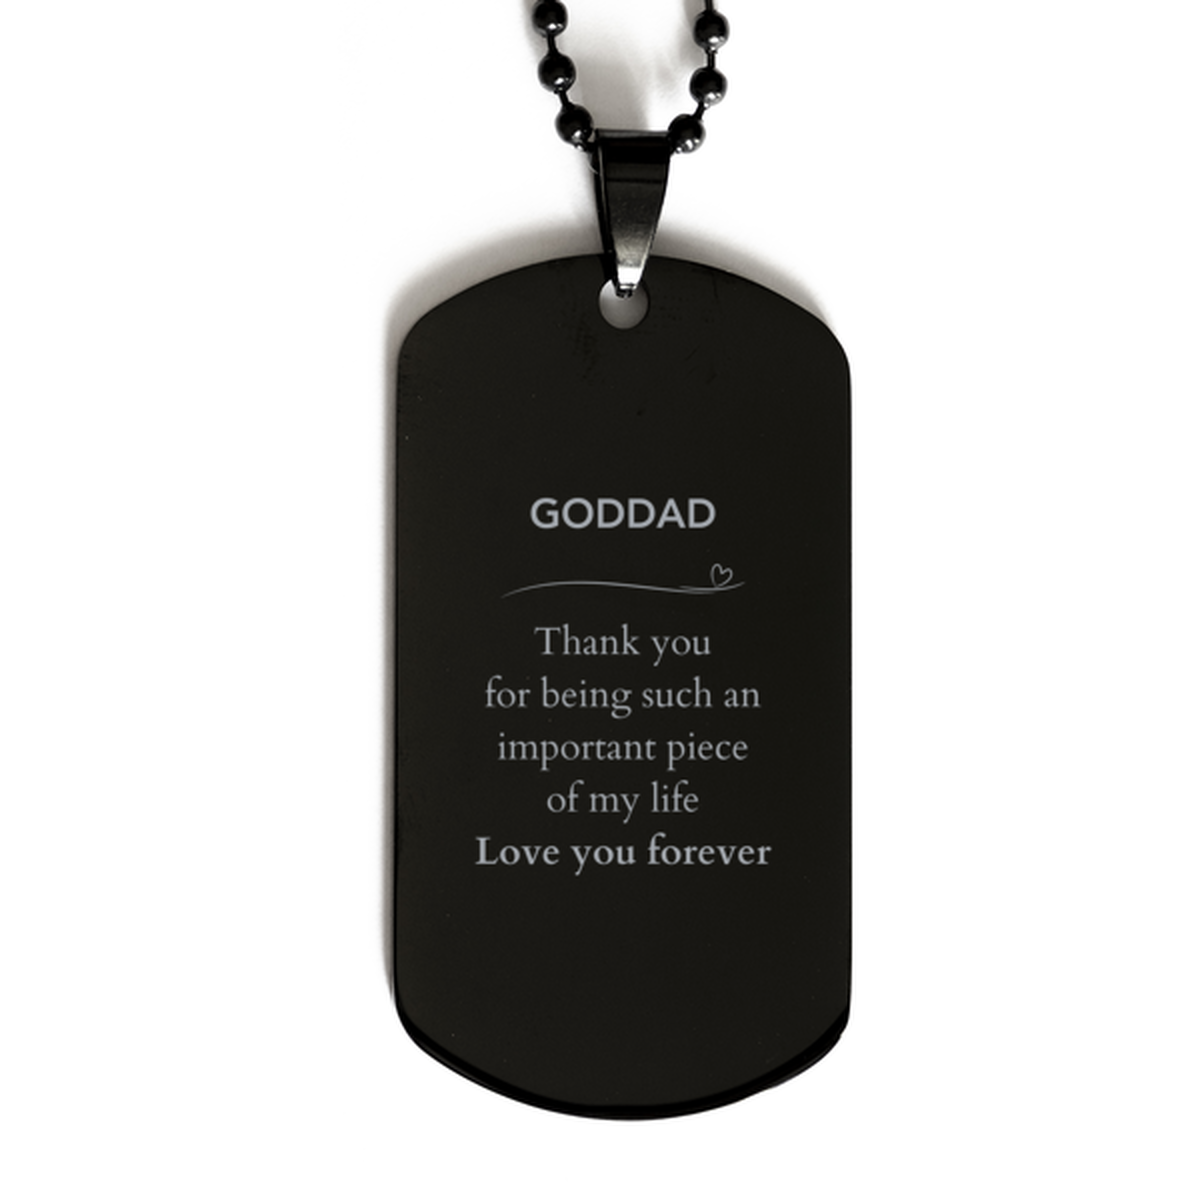 Appropriate Goddad Black Dog Tag Epic Birthday Gifts for Goddad Thank you for being such an important piece of my life Goddad Christmas Mothers Fathers Day